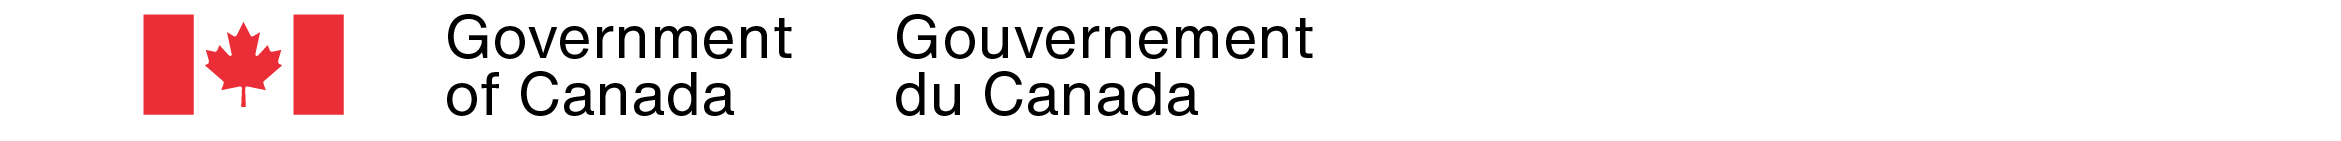 The Government of Canada signature in its standard colours (black type, FIP red flag symbol)